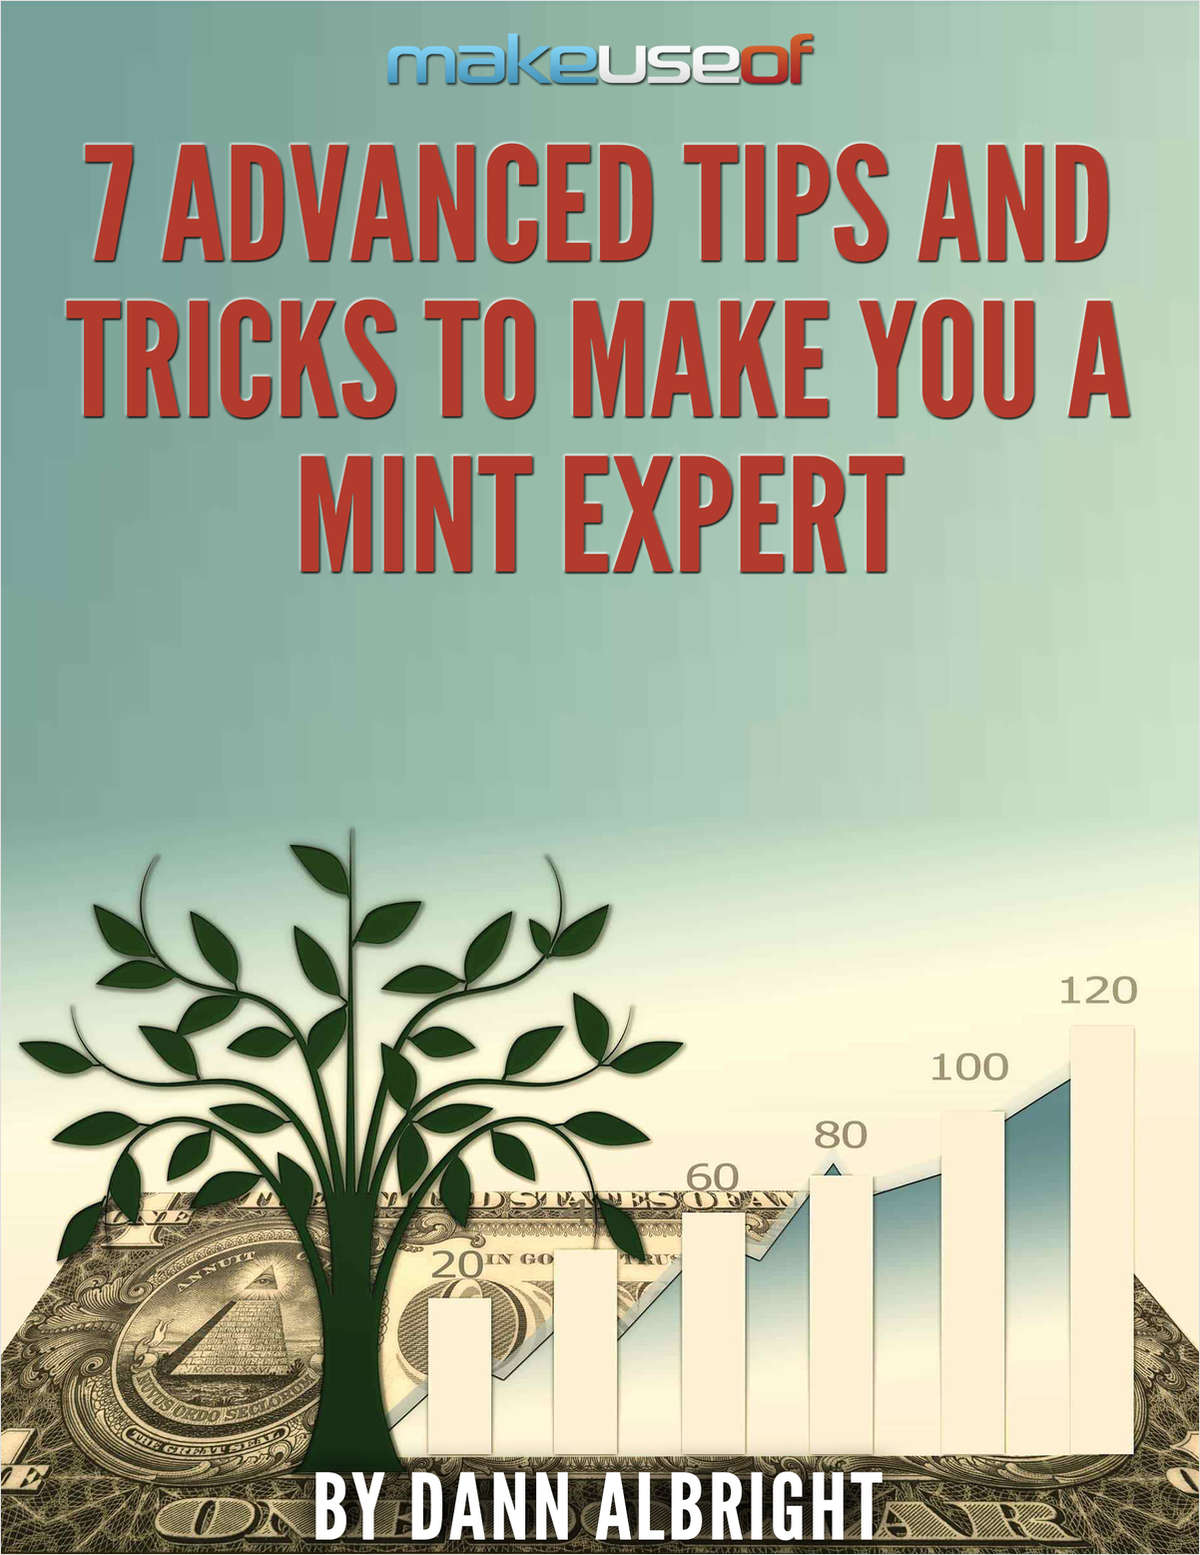 7 Advanced Tips and Tricks to Make You a Mint Expert